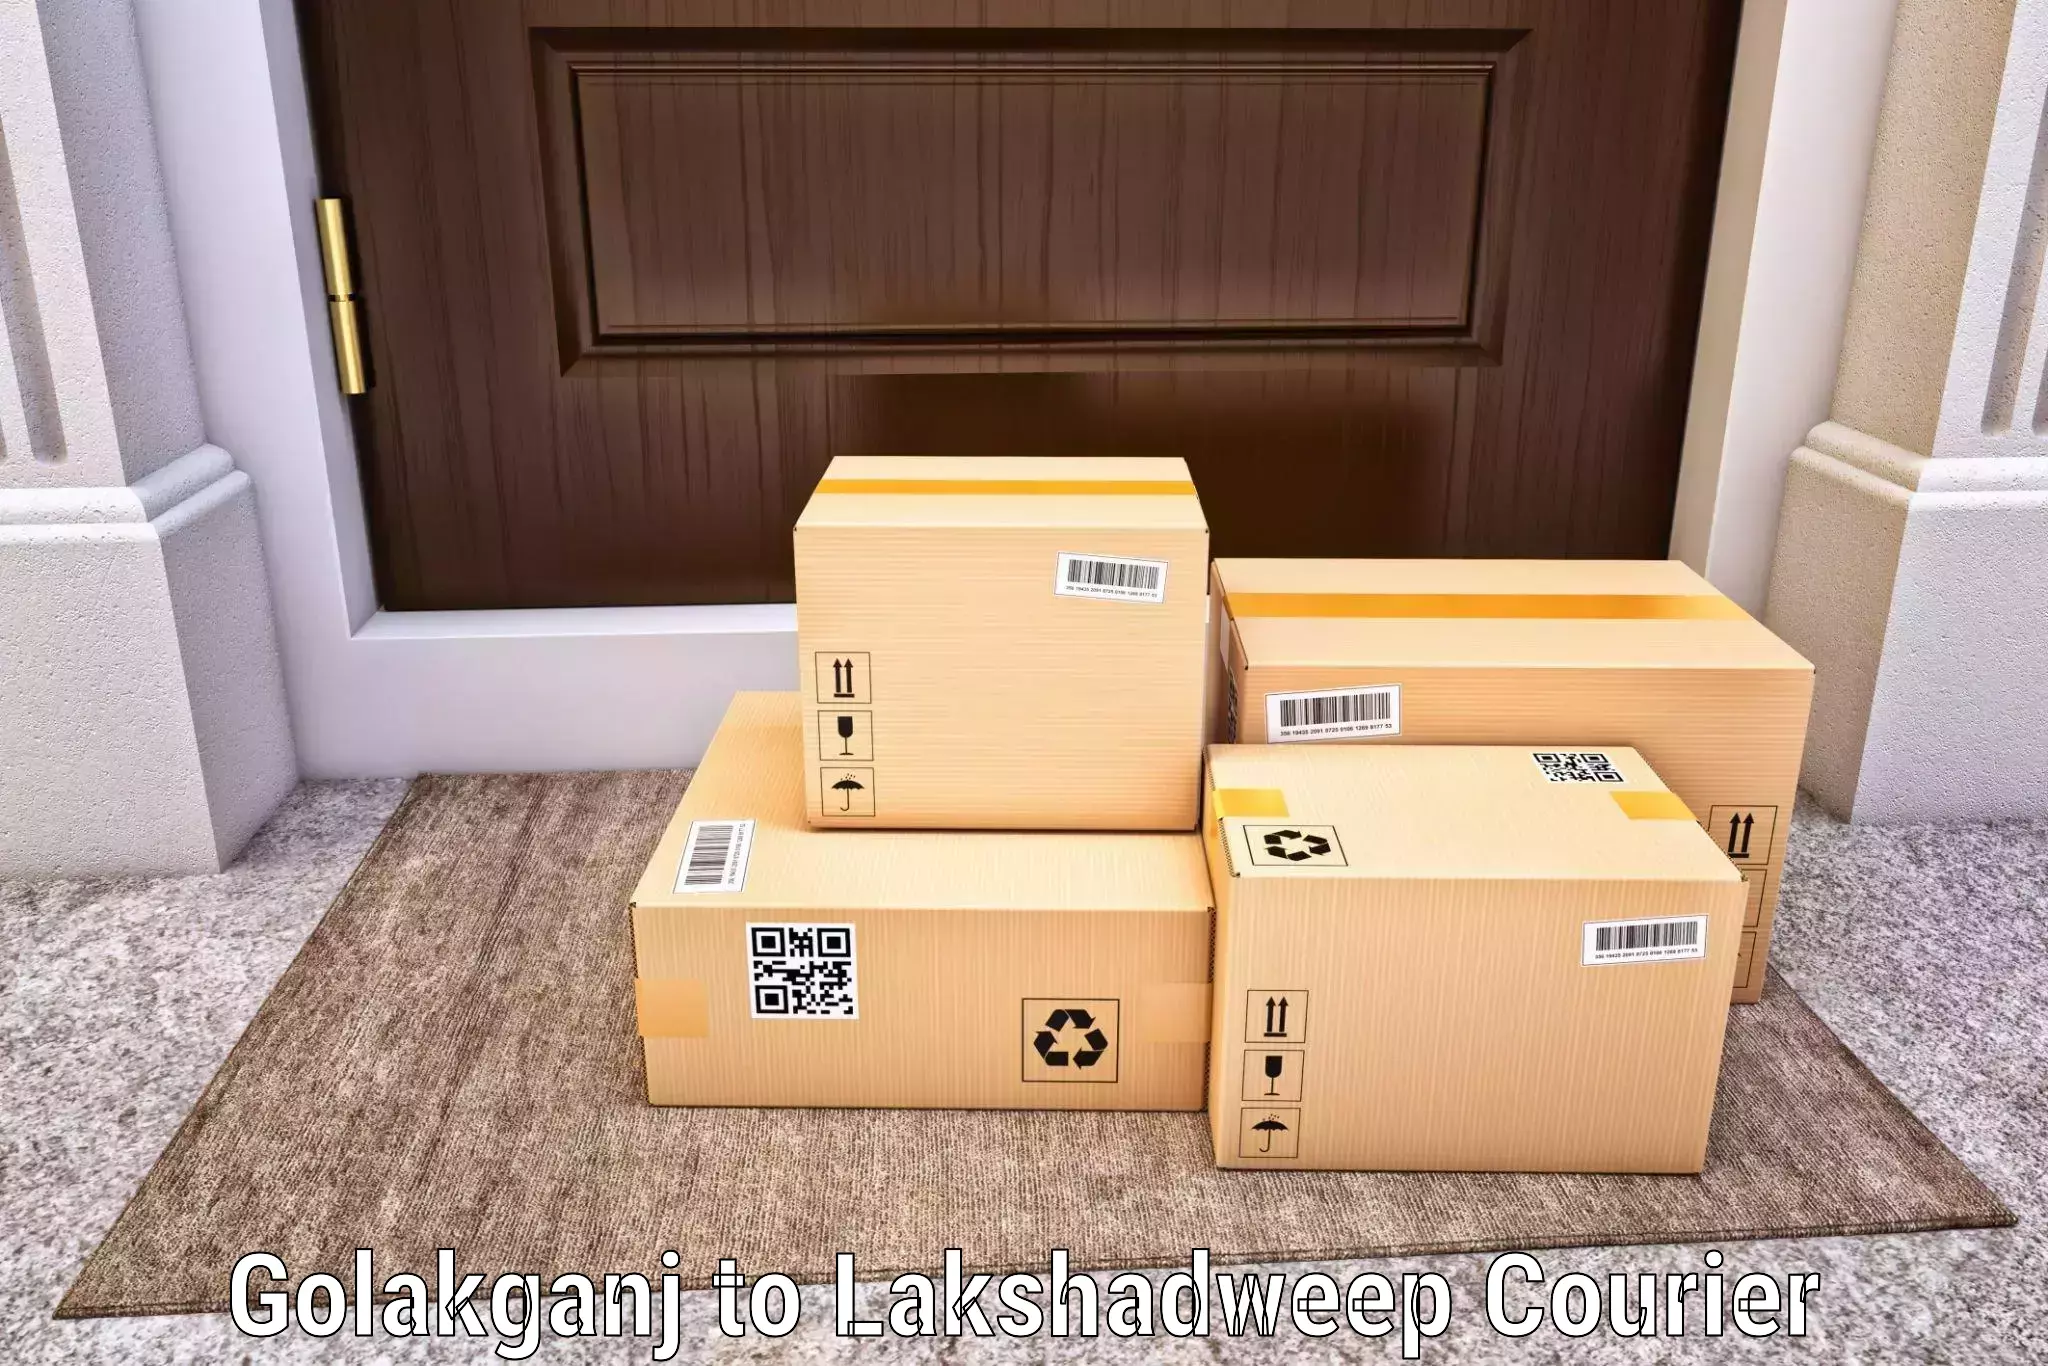 Efficient parcel service in Golakganj to Lakshadweep